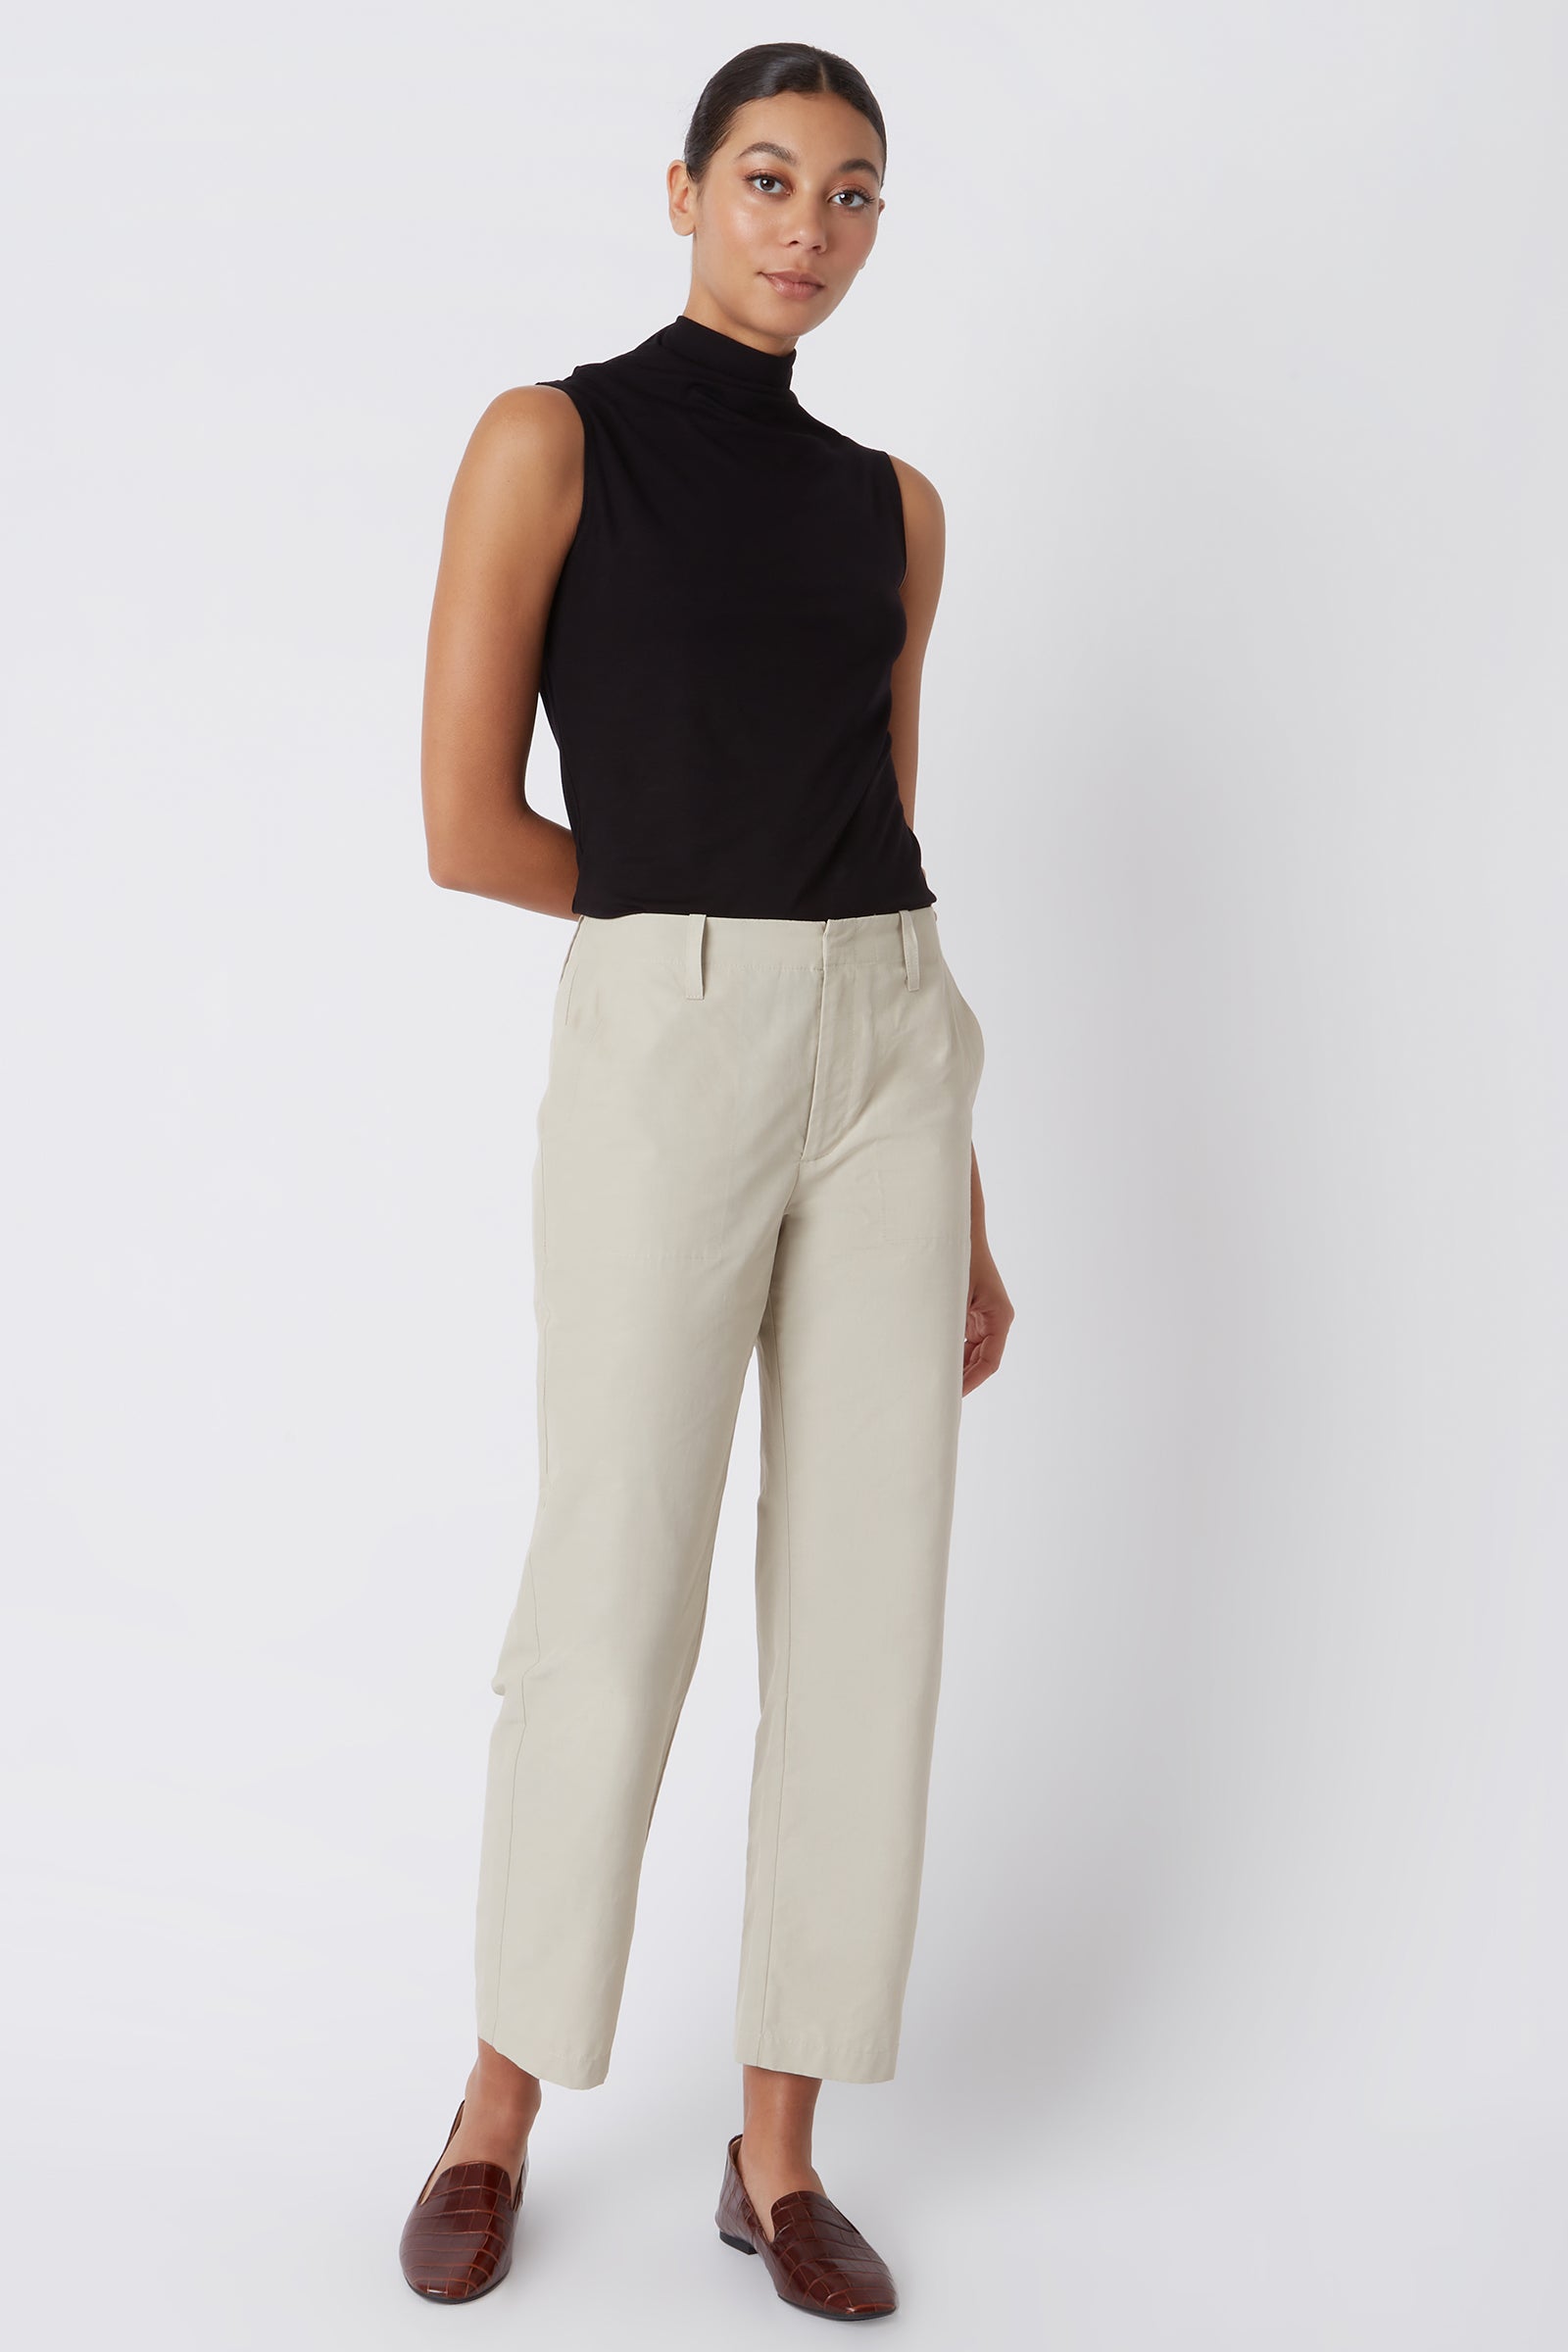 Kal Rieman Francoise Cigarette Pant in Classic Khaki Italian Broadcloth on Model with Arm Behind Back Full Front View